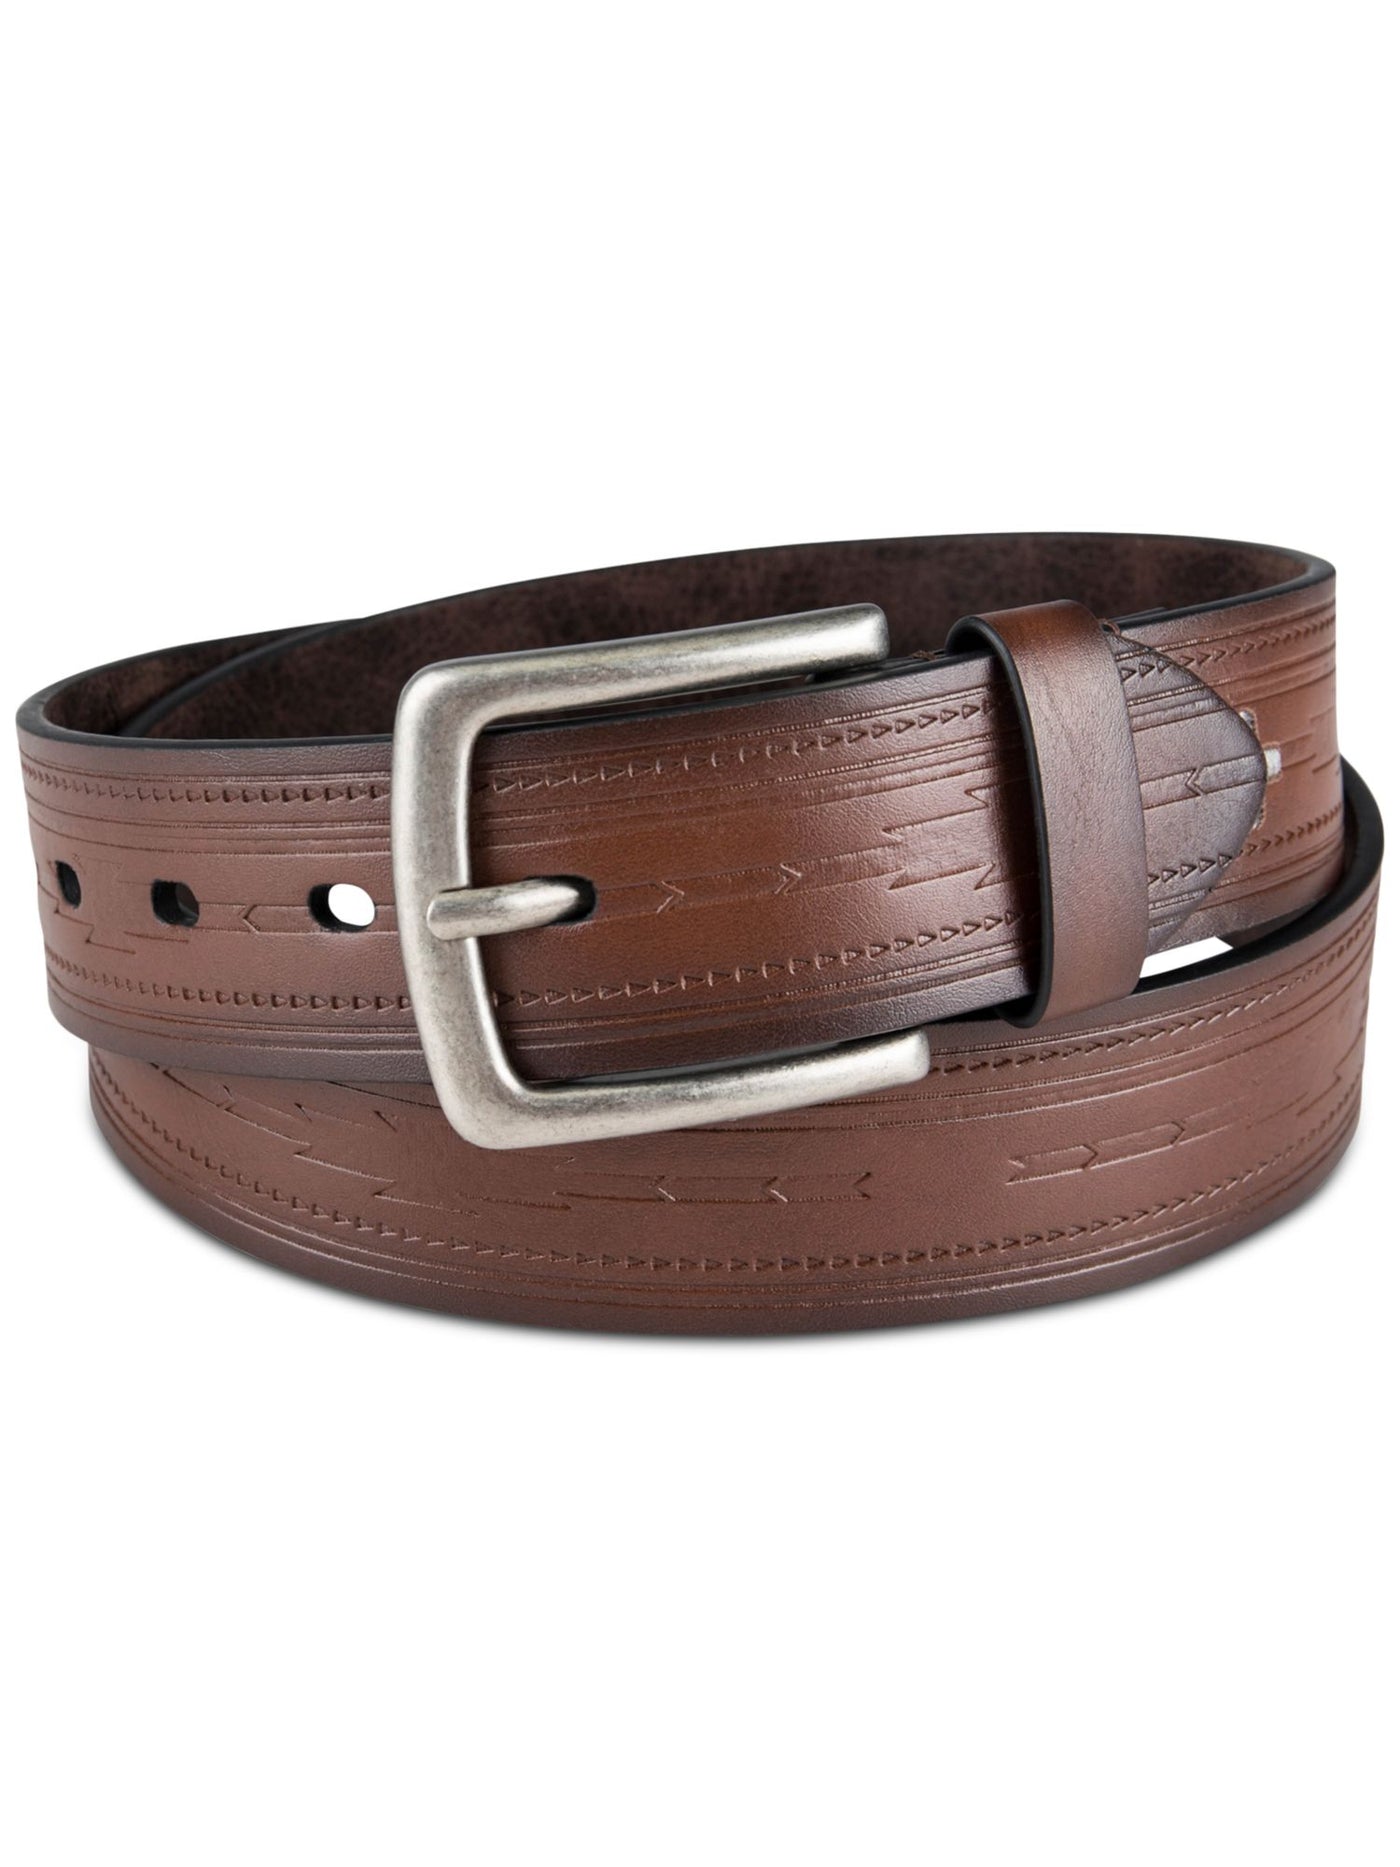 SUN STONE Mens Brown Pebbled Embossed Faux Leather Casual Belt S 30-32